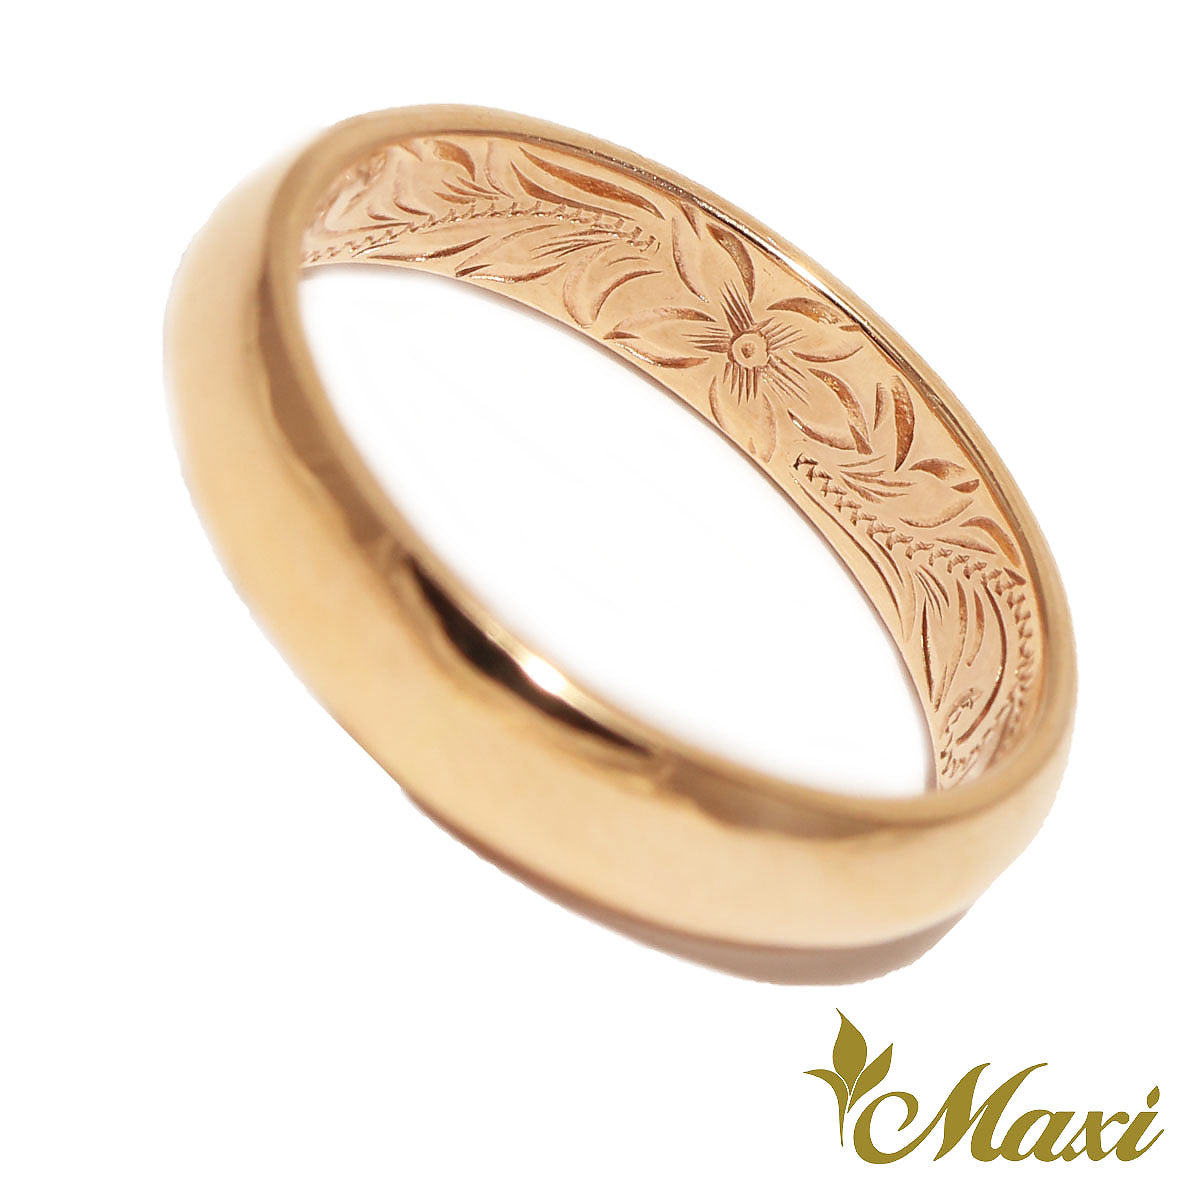 14K Gold] 4mm Inside Engraved Ring*Made to Order* (R0583) 14金